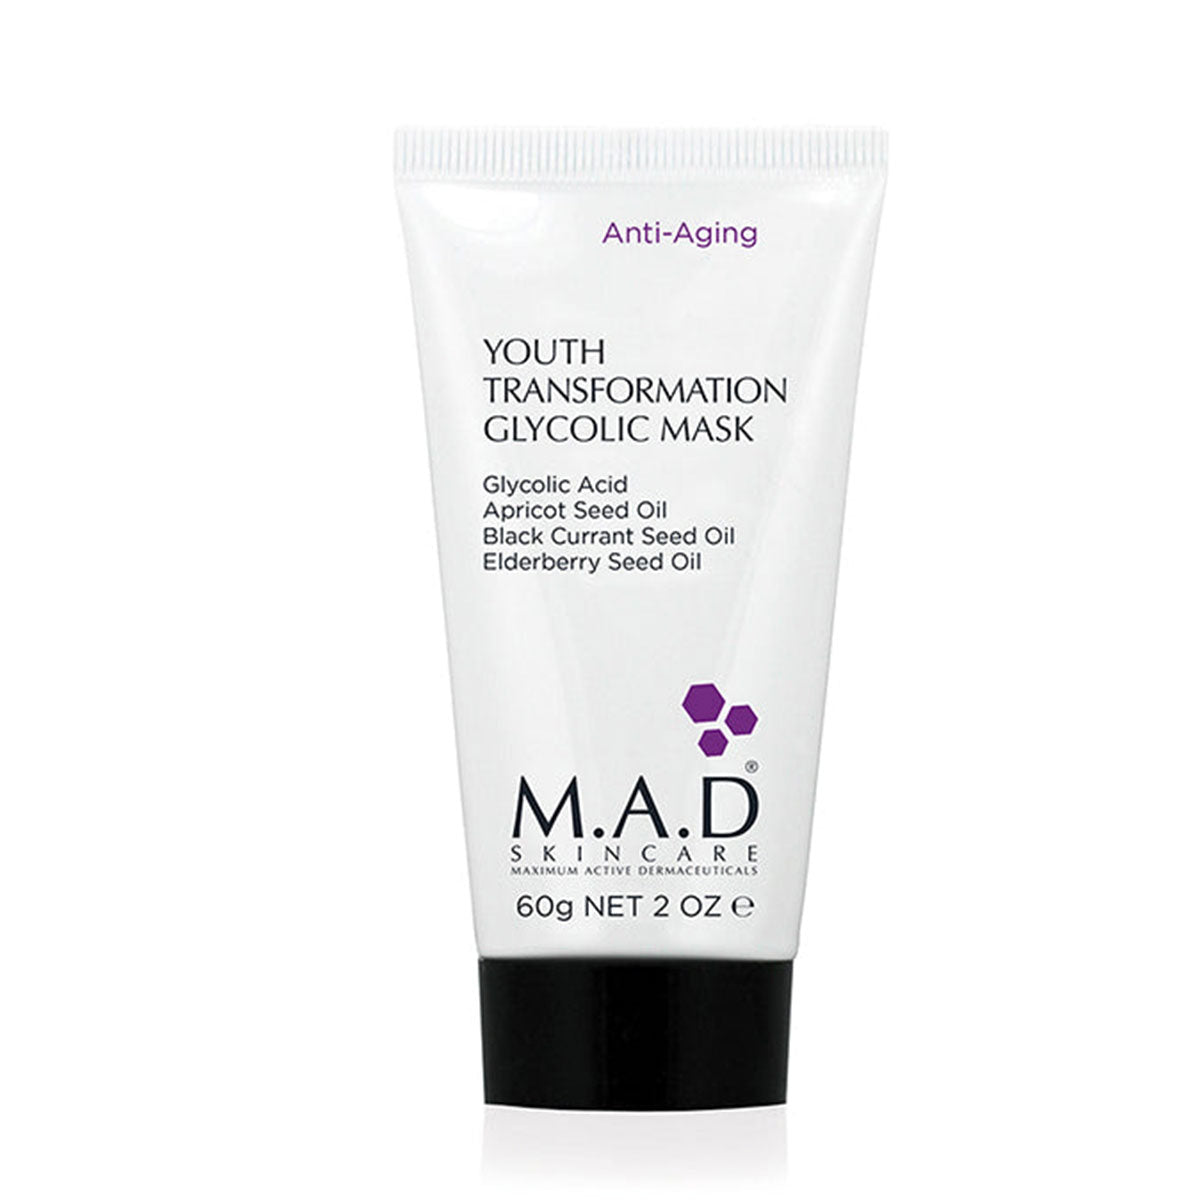 M.A.D Youth Transformation Glycolic Mask